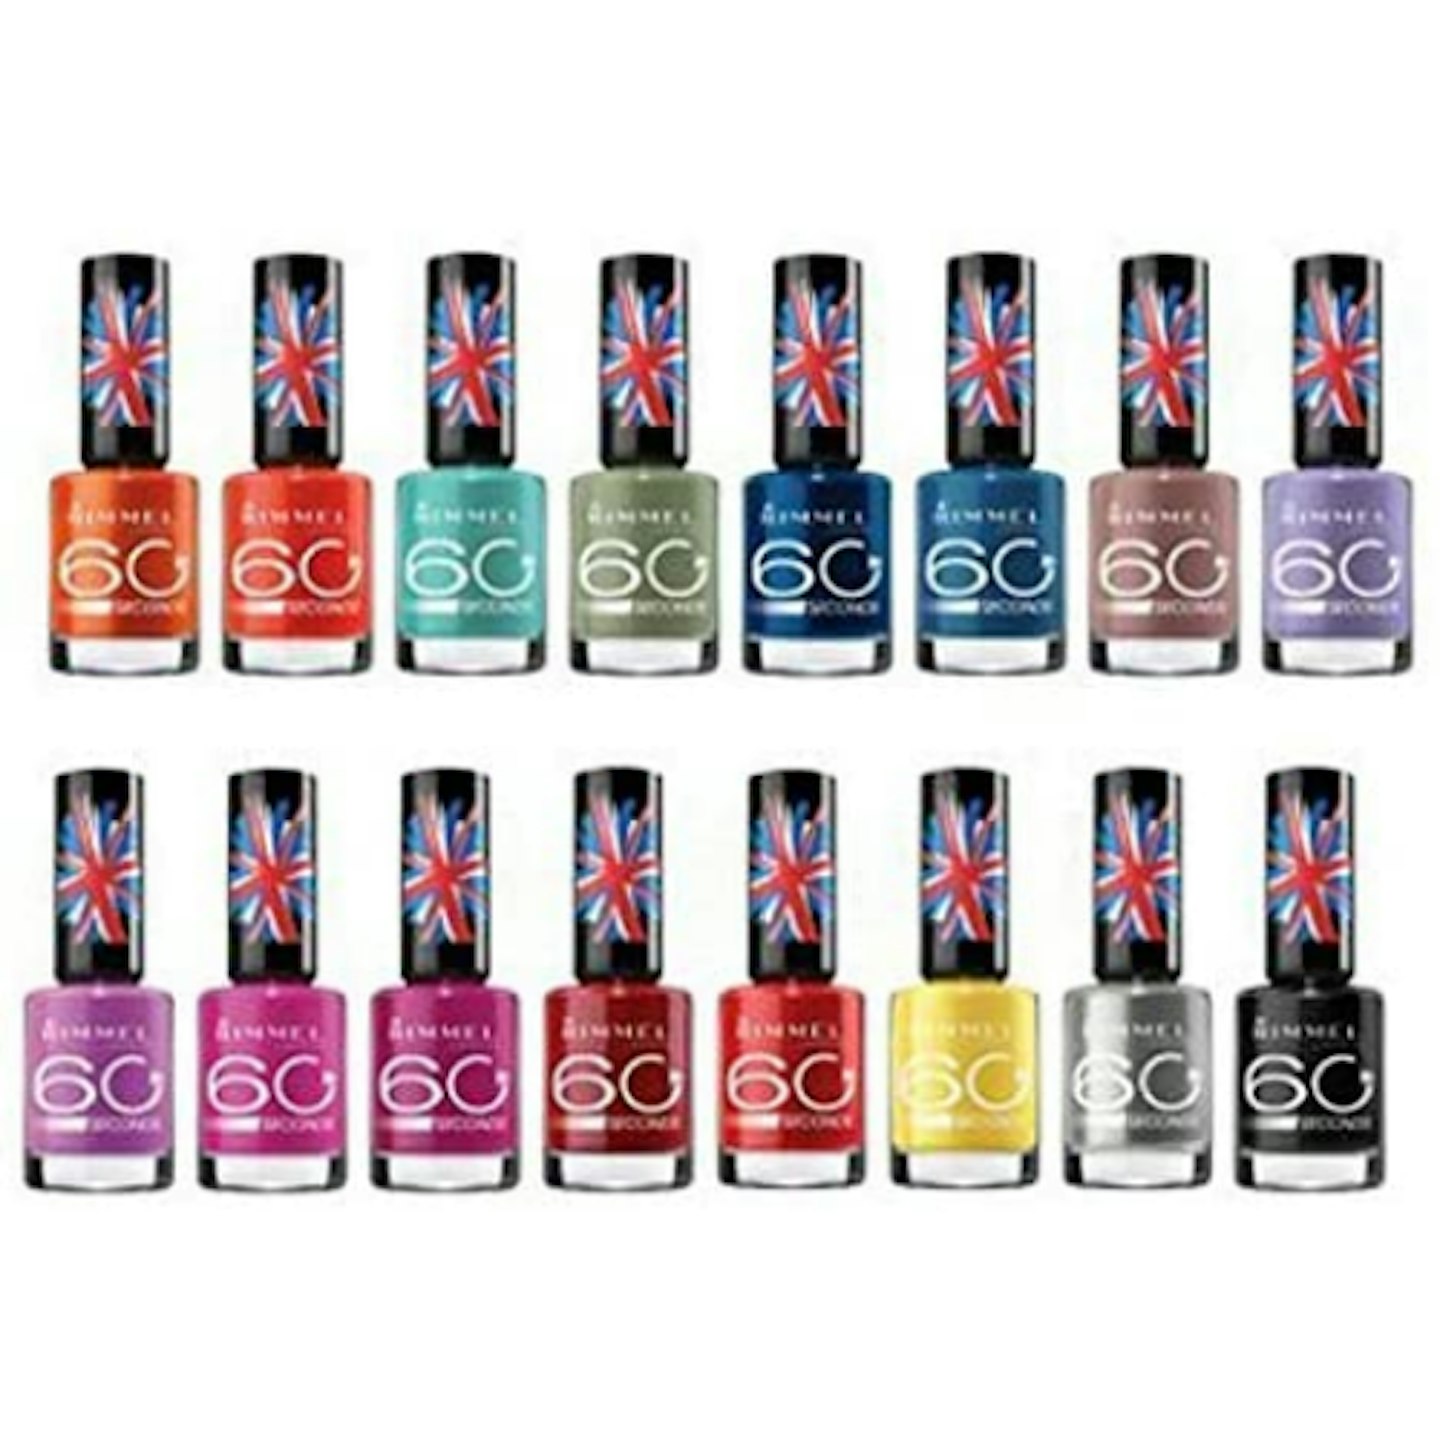 Rimmel London 60 Second Nail Polish 15 Pieces Assorted